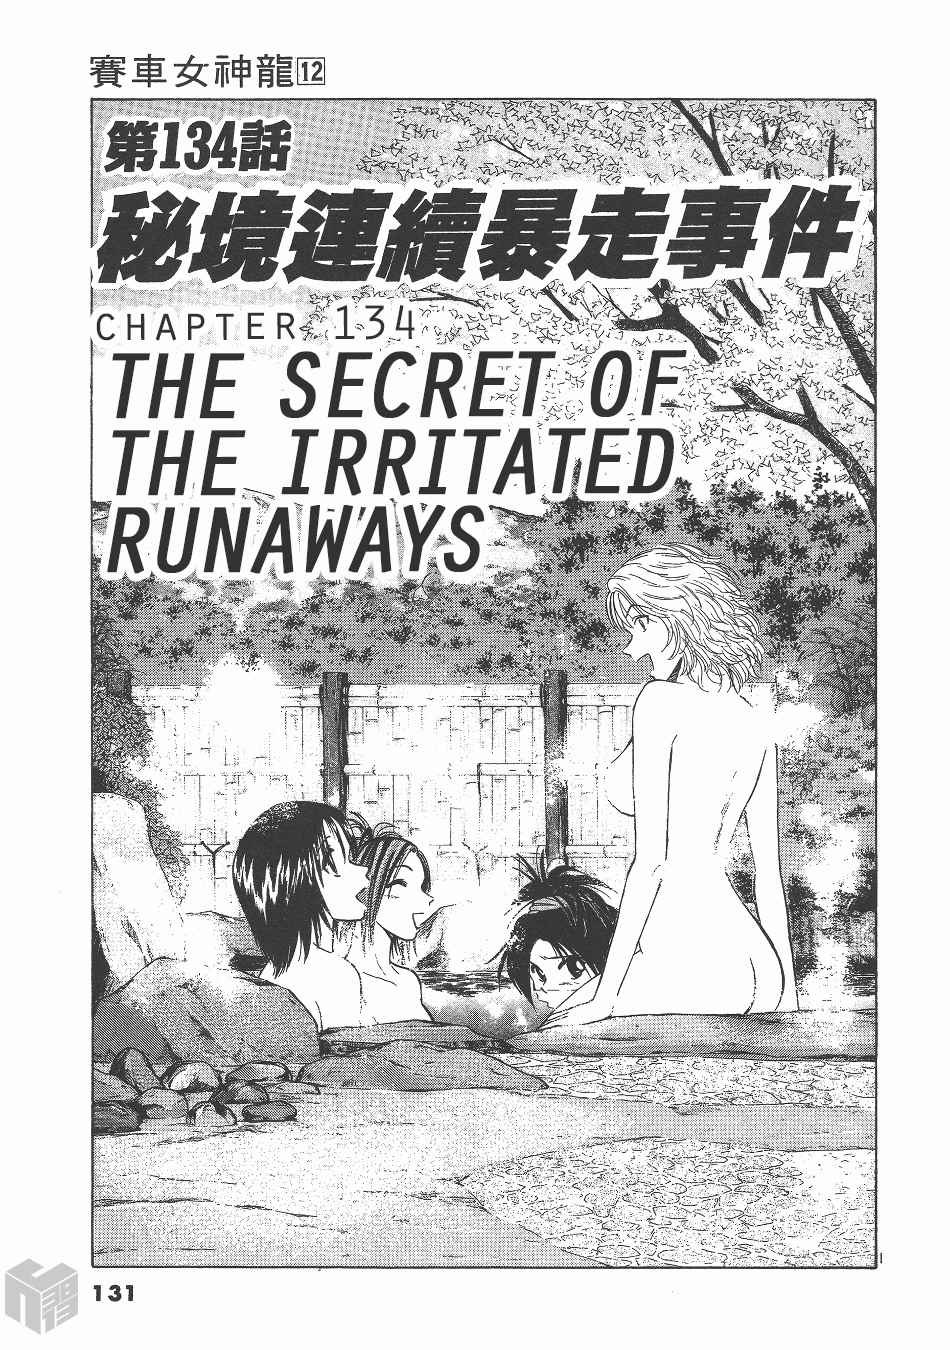 Over Rev! Vol. 12 Ch. 134 The Secret of the Irritated Runaways